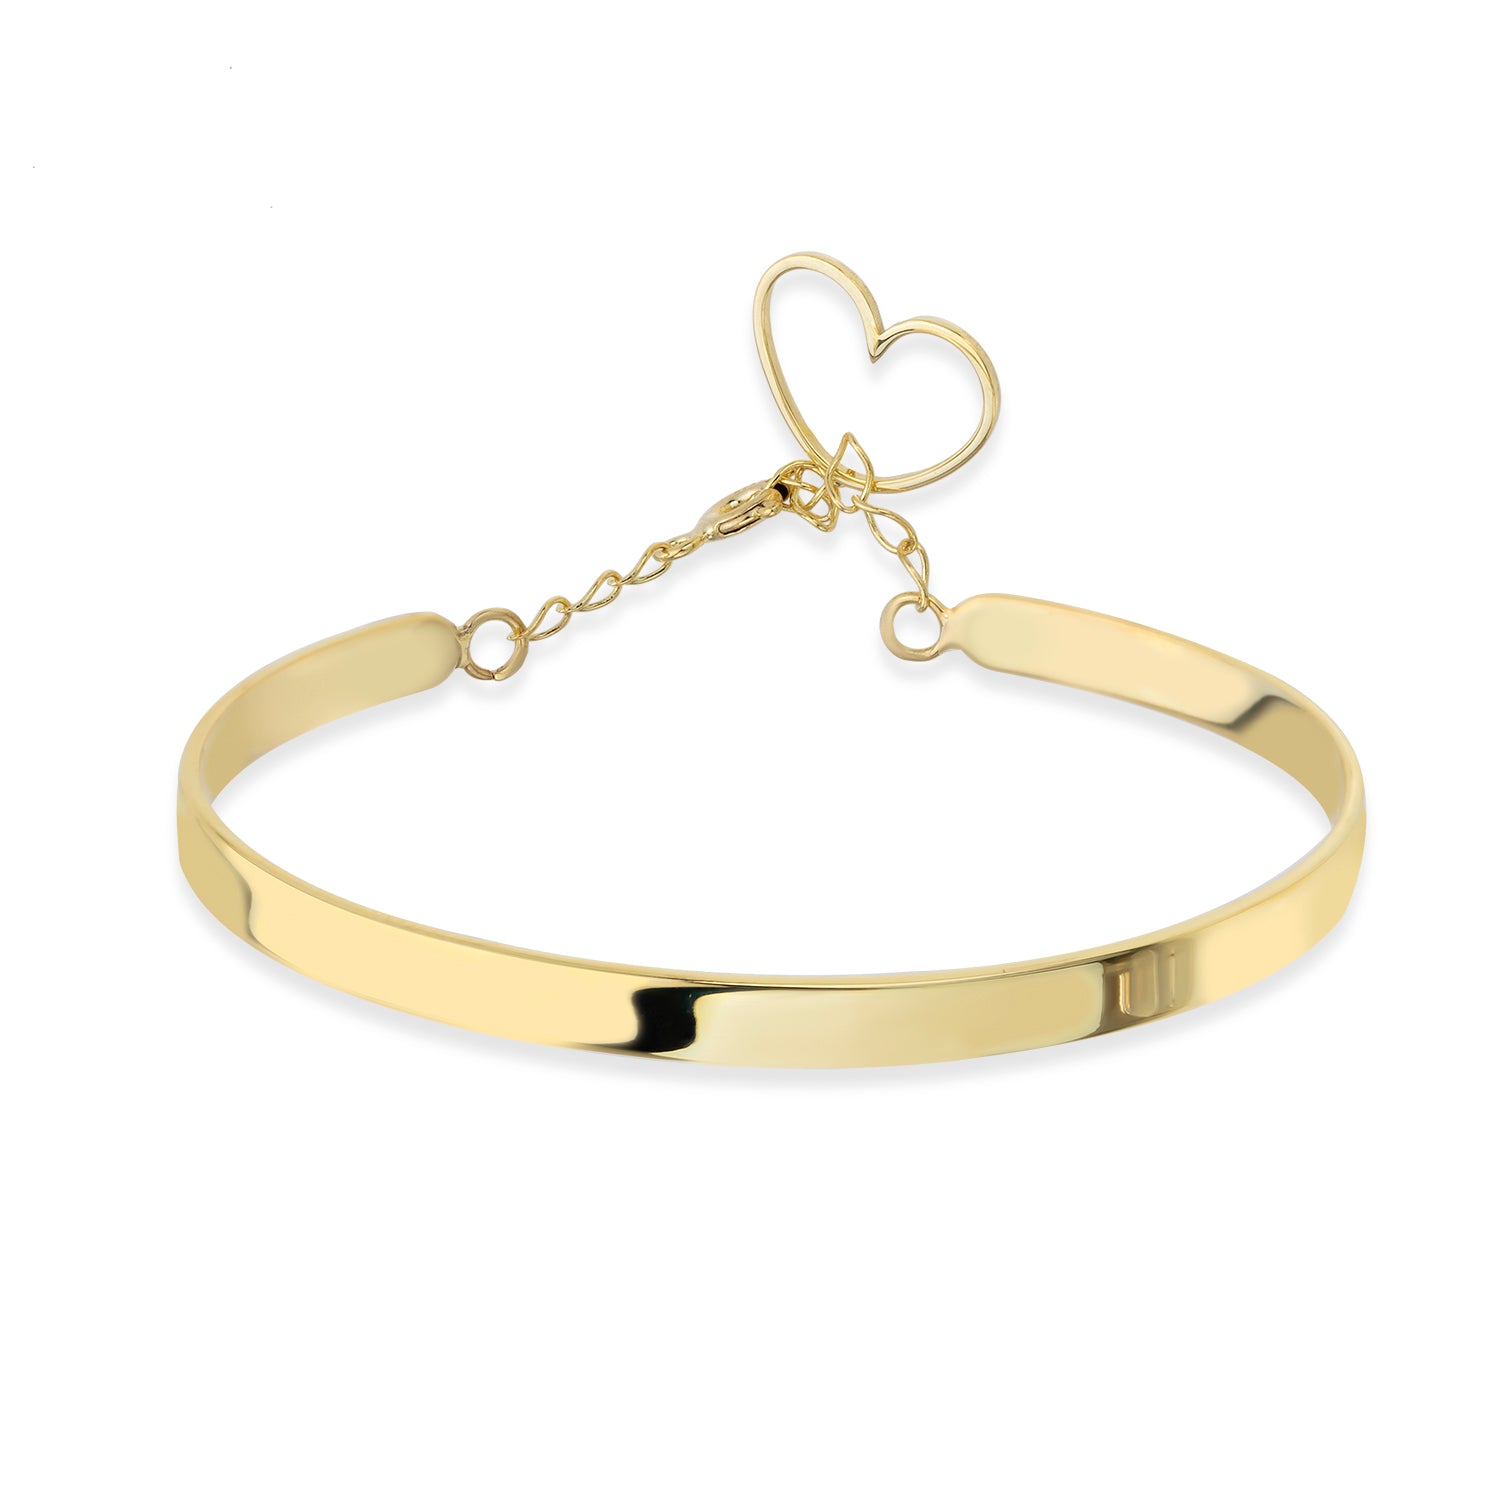 Herz Armband in Gold/Silber.